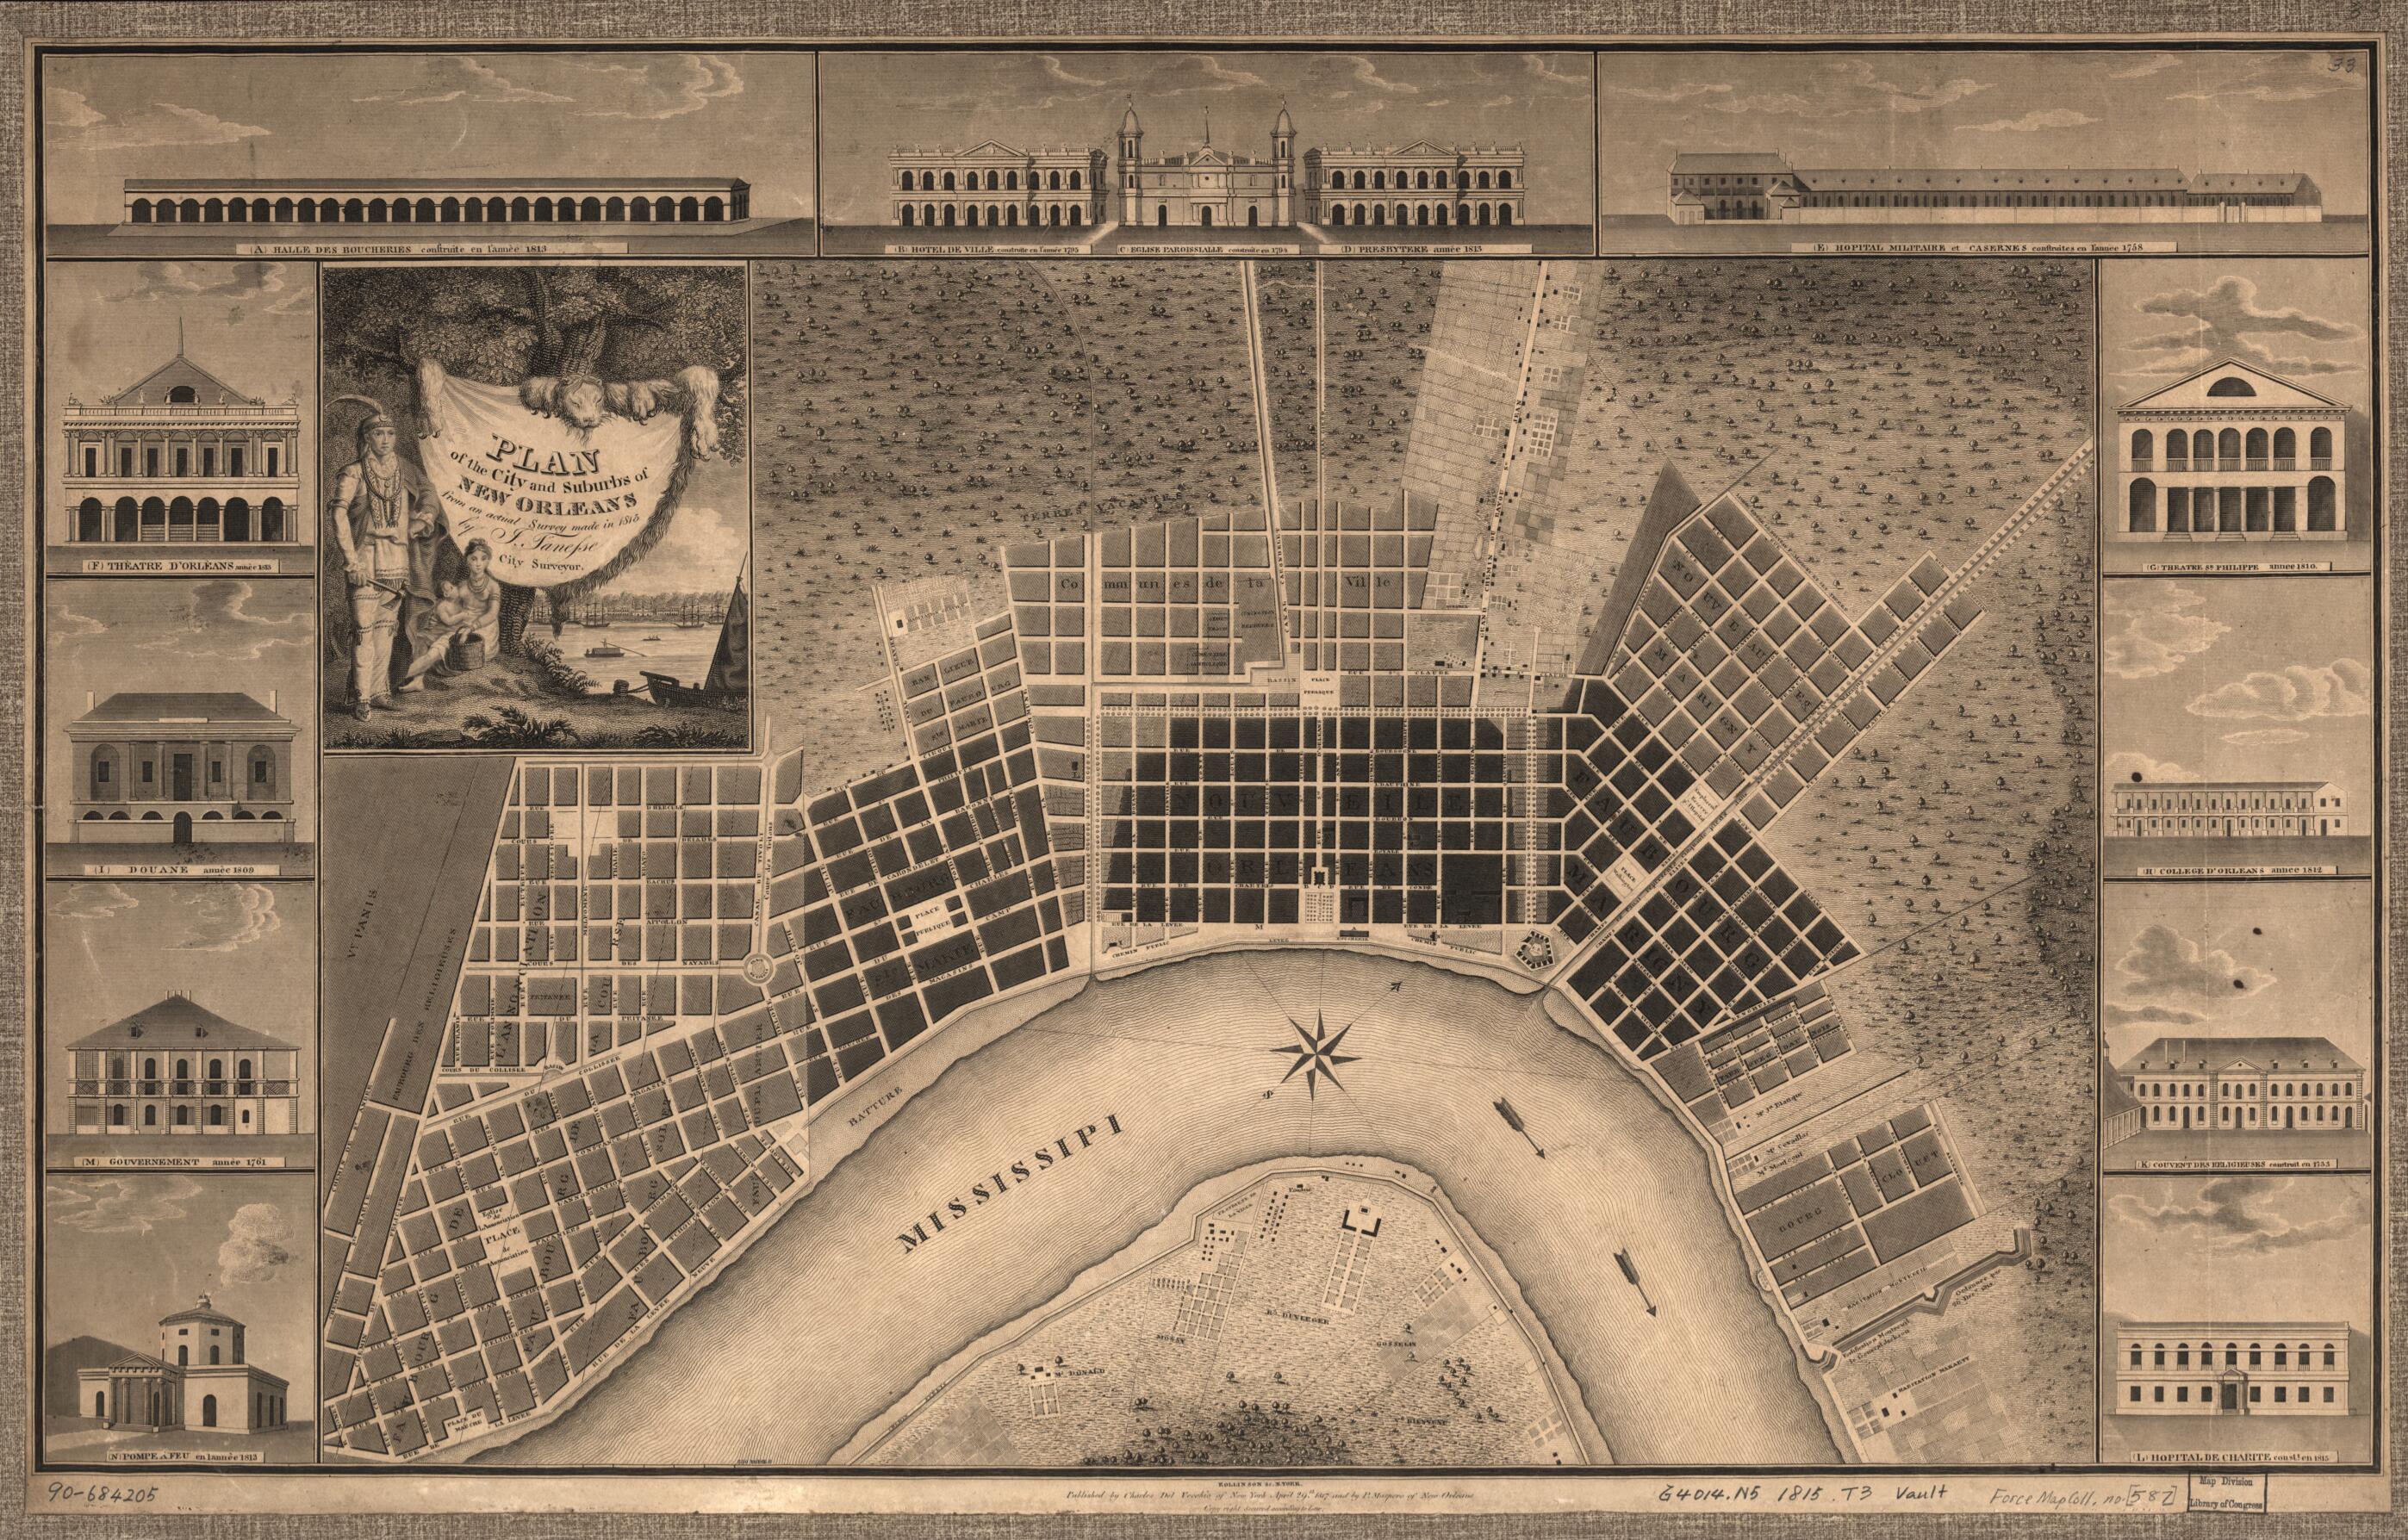 This old map of Plan of the City and Suburbs of New Orleans : from an Actual Survey Made In from 1815 was created by Charles Del Vecchio, P. Maspero, William Rollinson, I. Tanesse in 1815